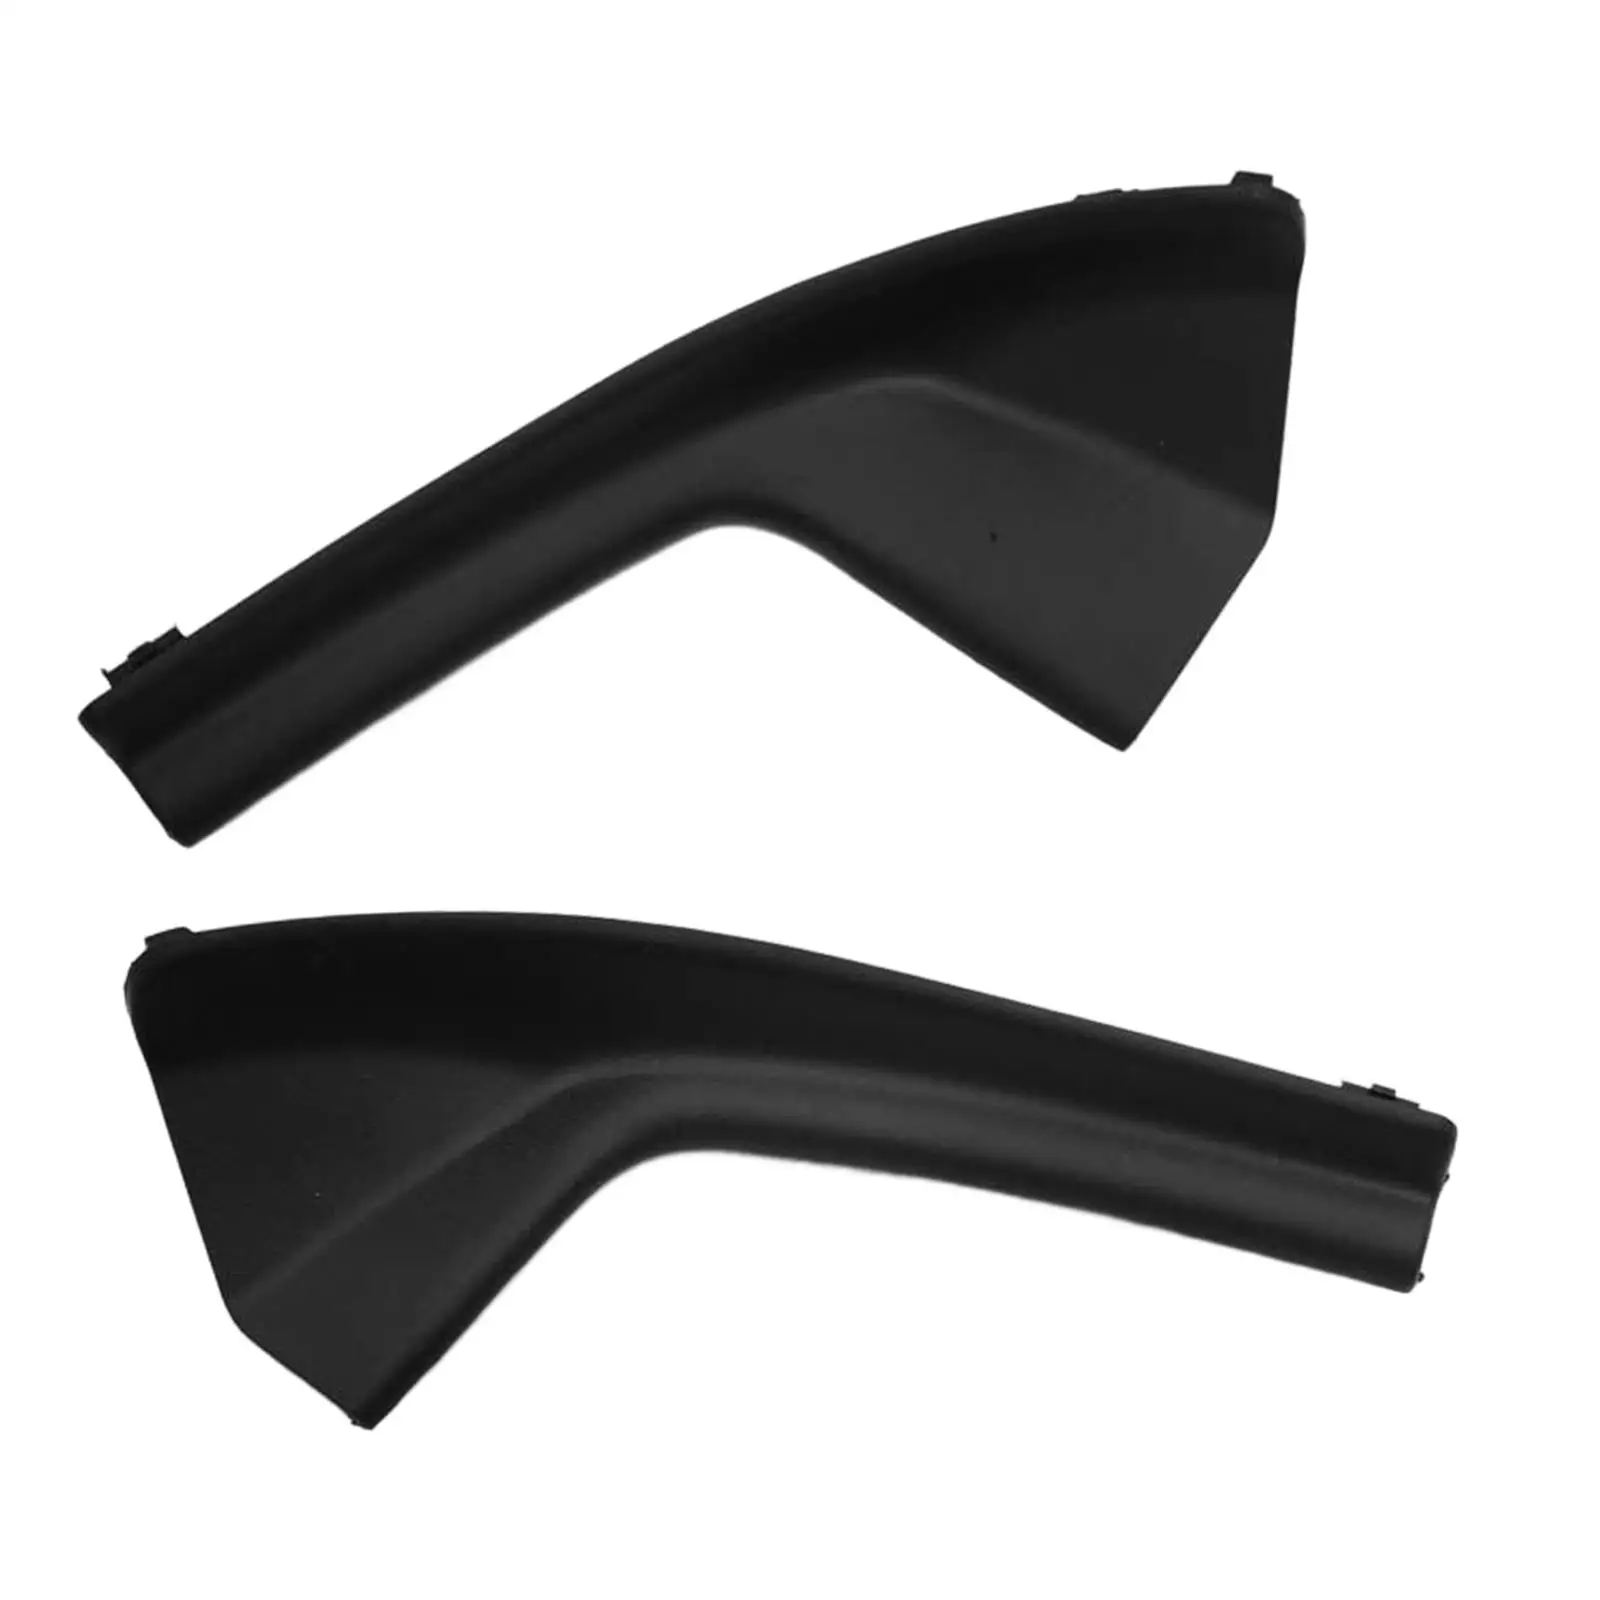 2 Pieces Windshield Wiper Side Trim Plate Cover 66895-ed50A 66894-ed500 Durable Left Right for Nissan Versa Sedan Tiida C11